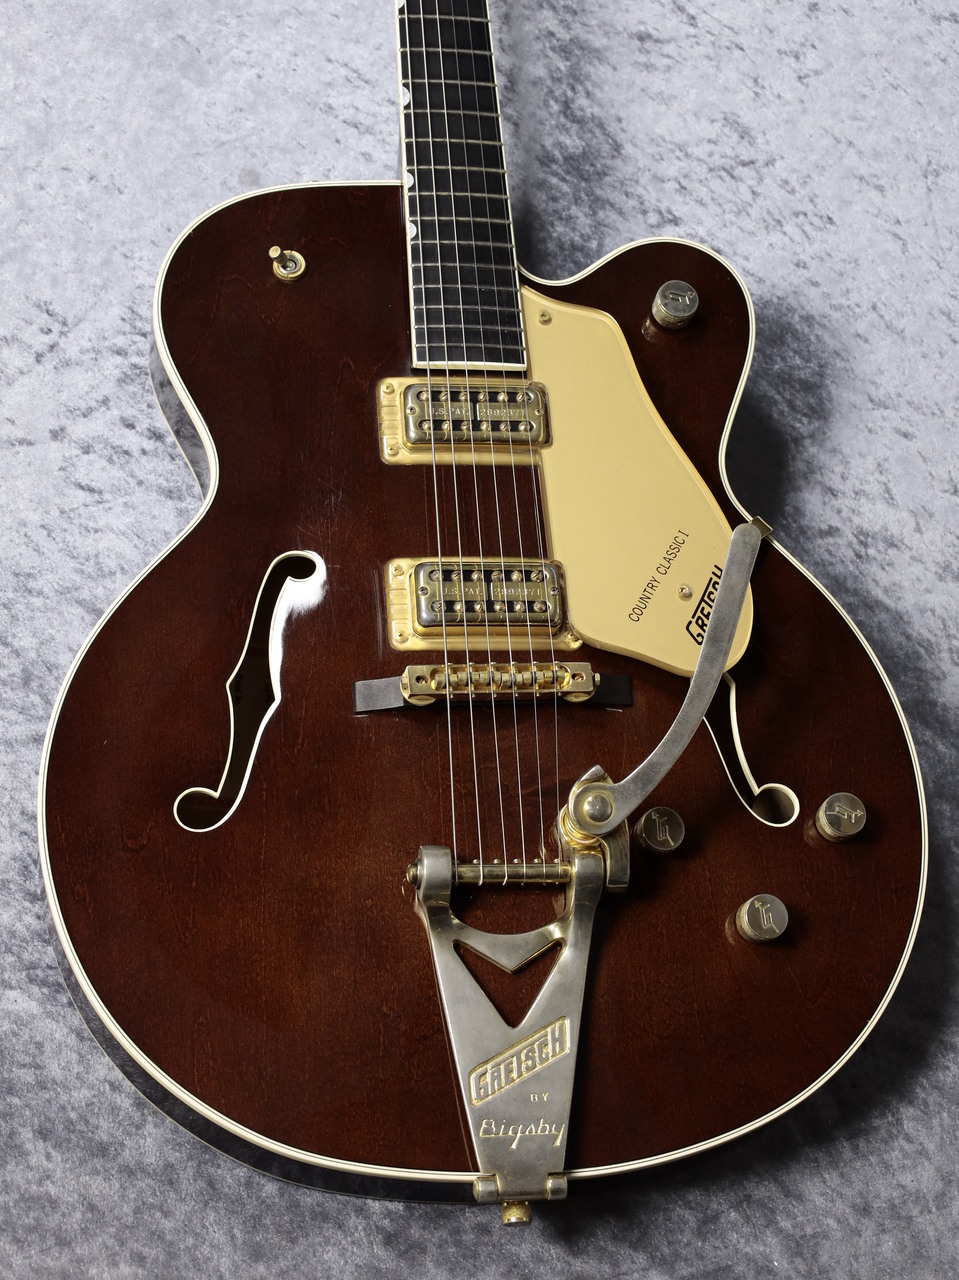 Gretsch 6122s Country Classic Ⅰ【2002'sUSED】【1階エレキ】（中古 